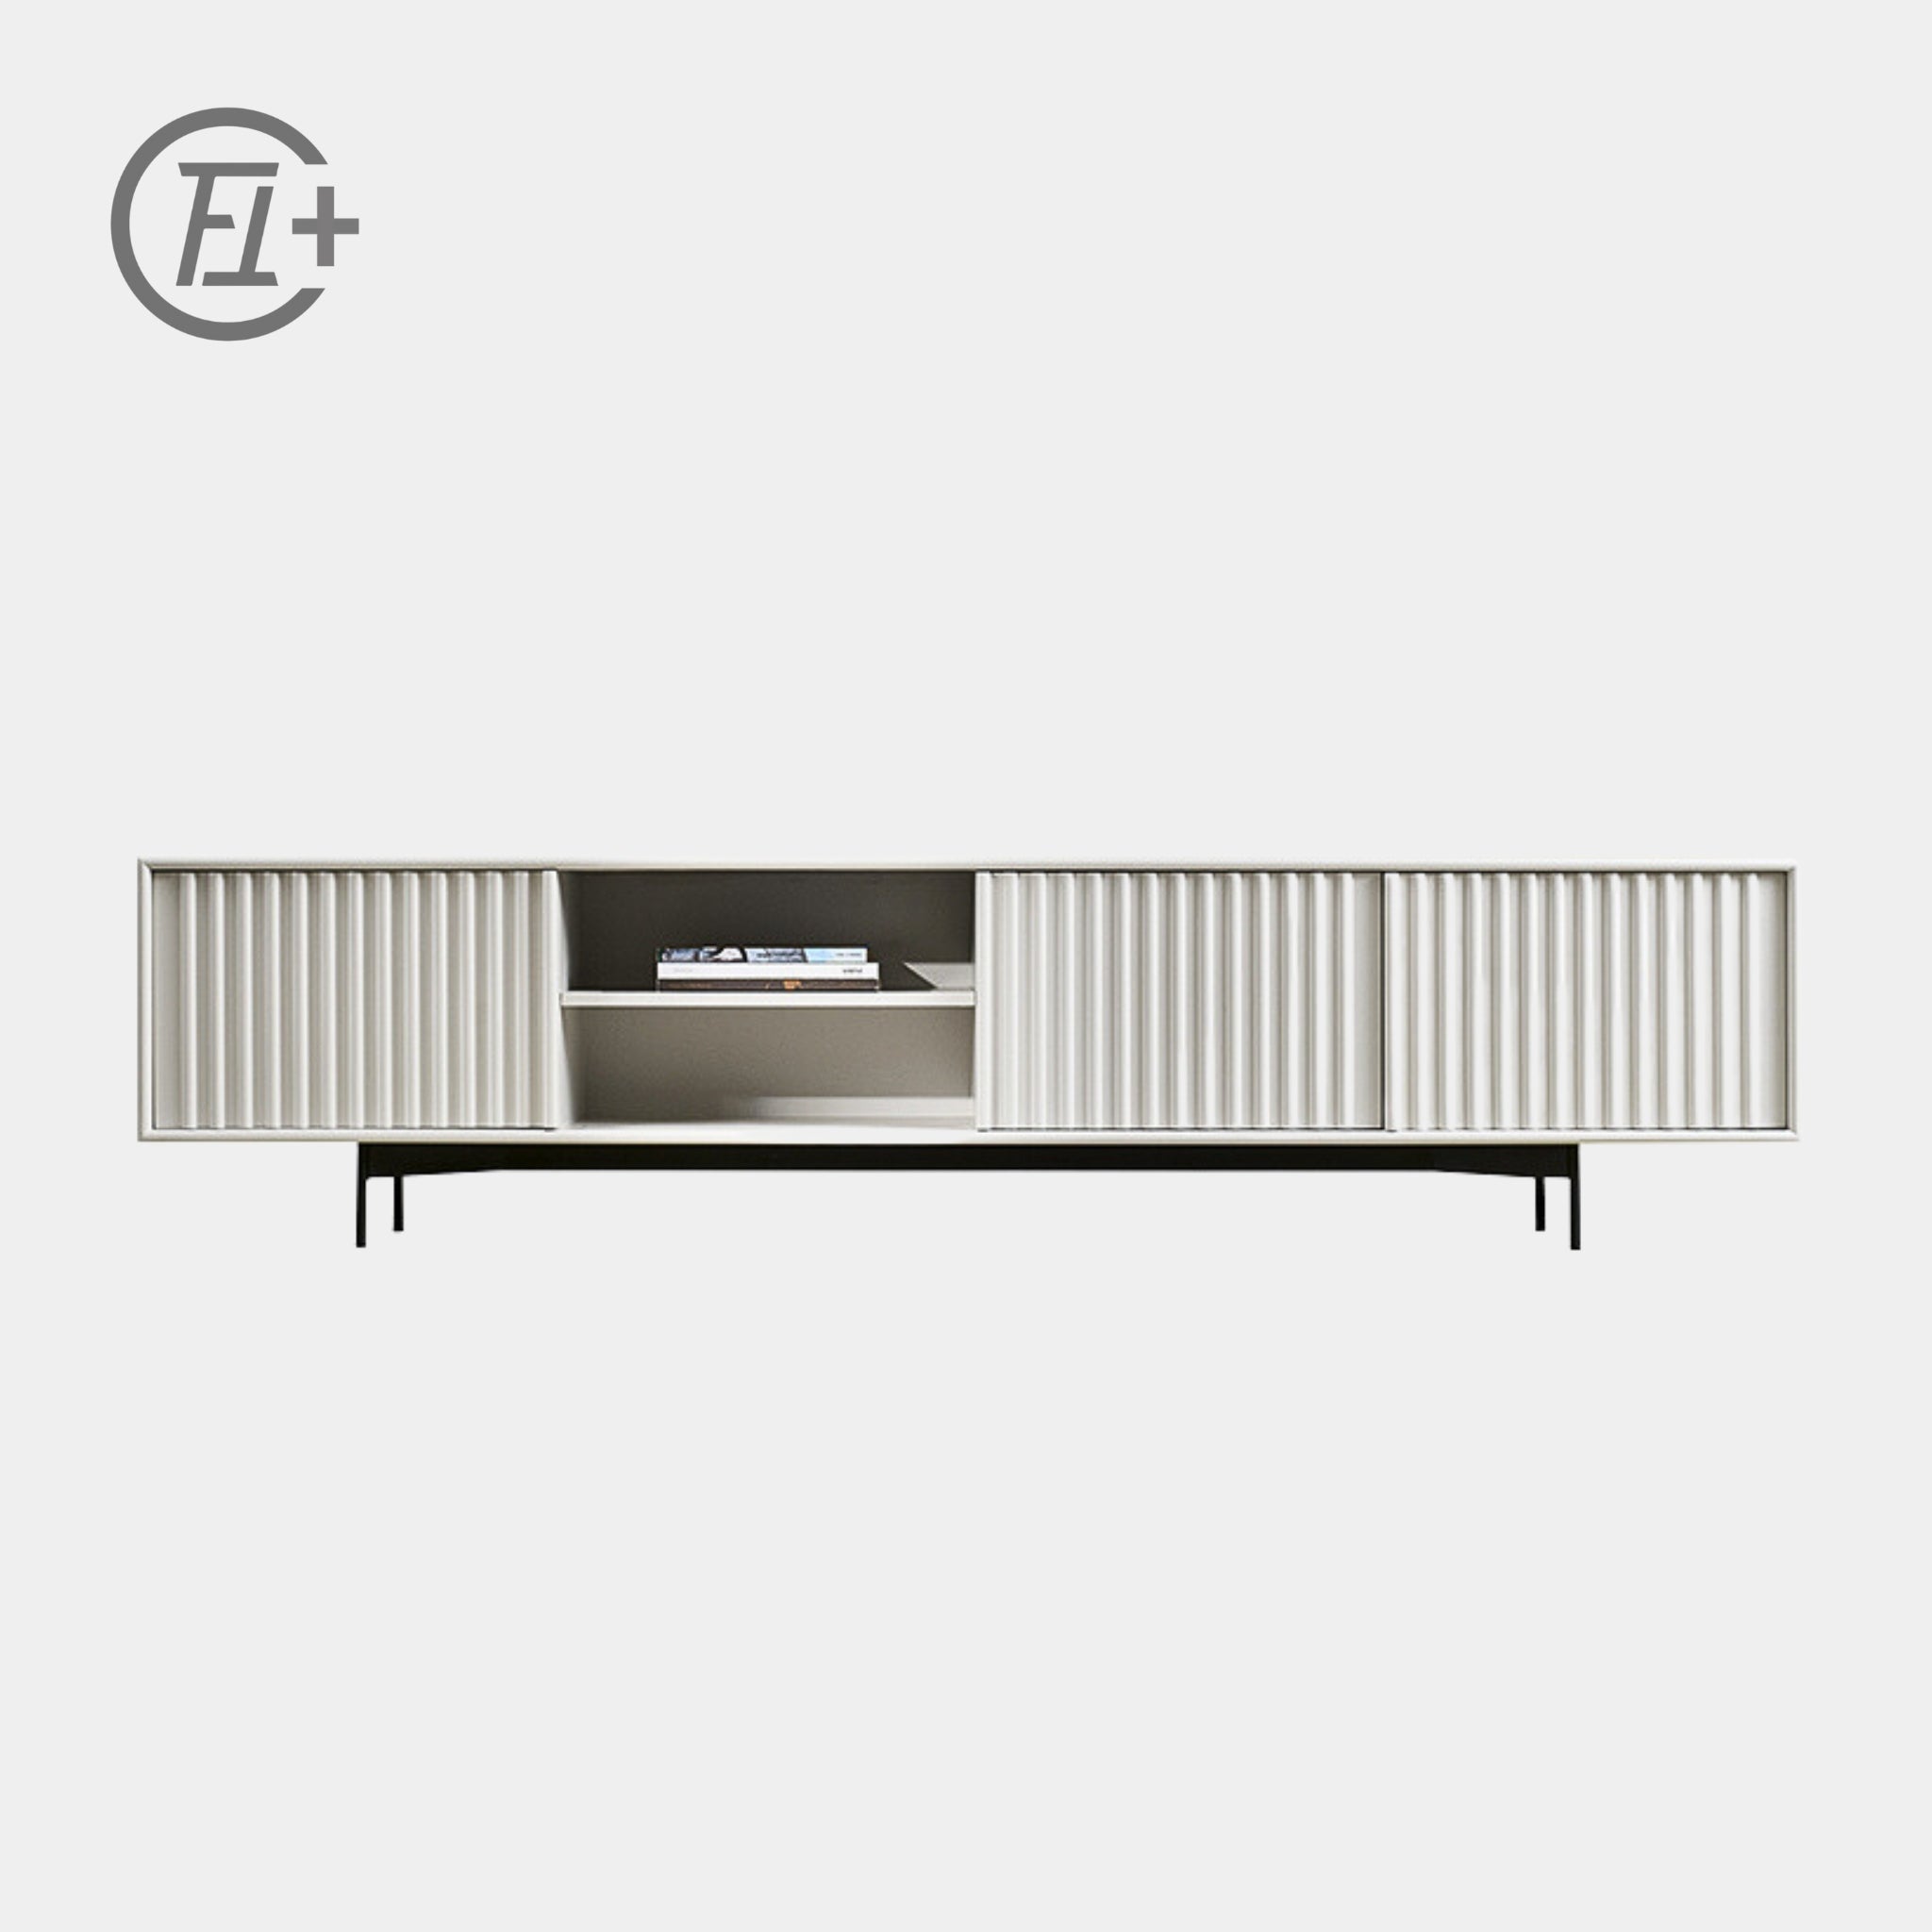 The Feelter Heb Tv Unit